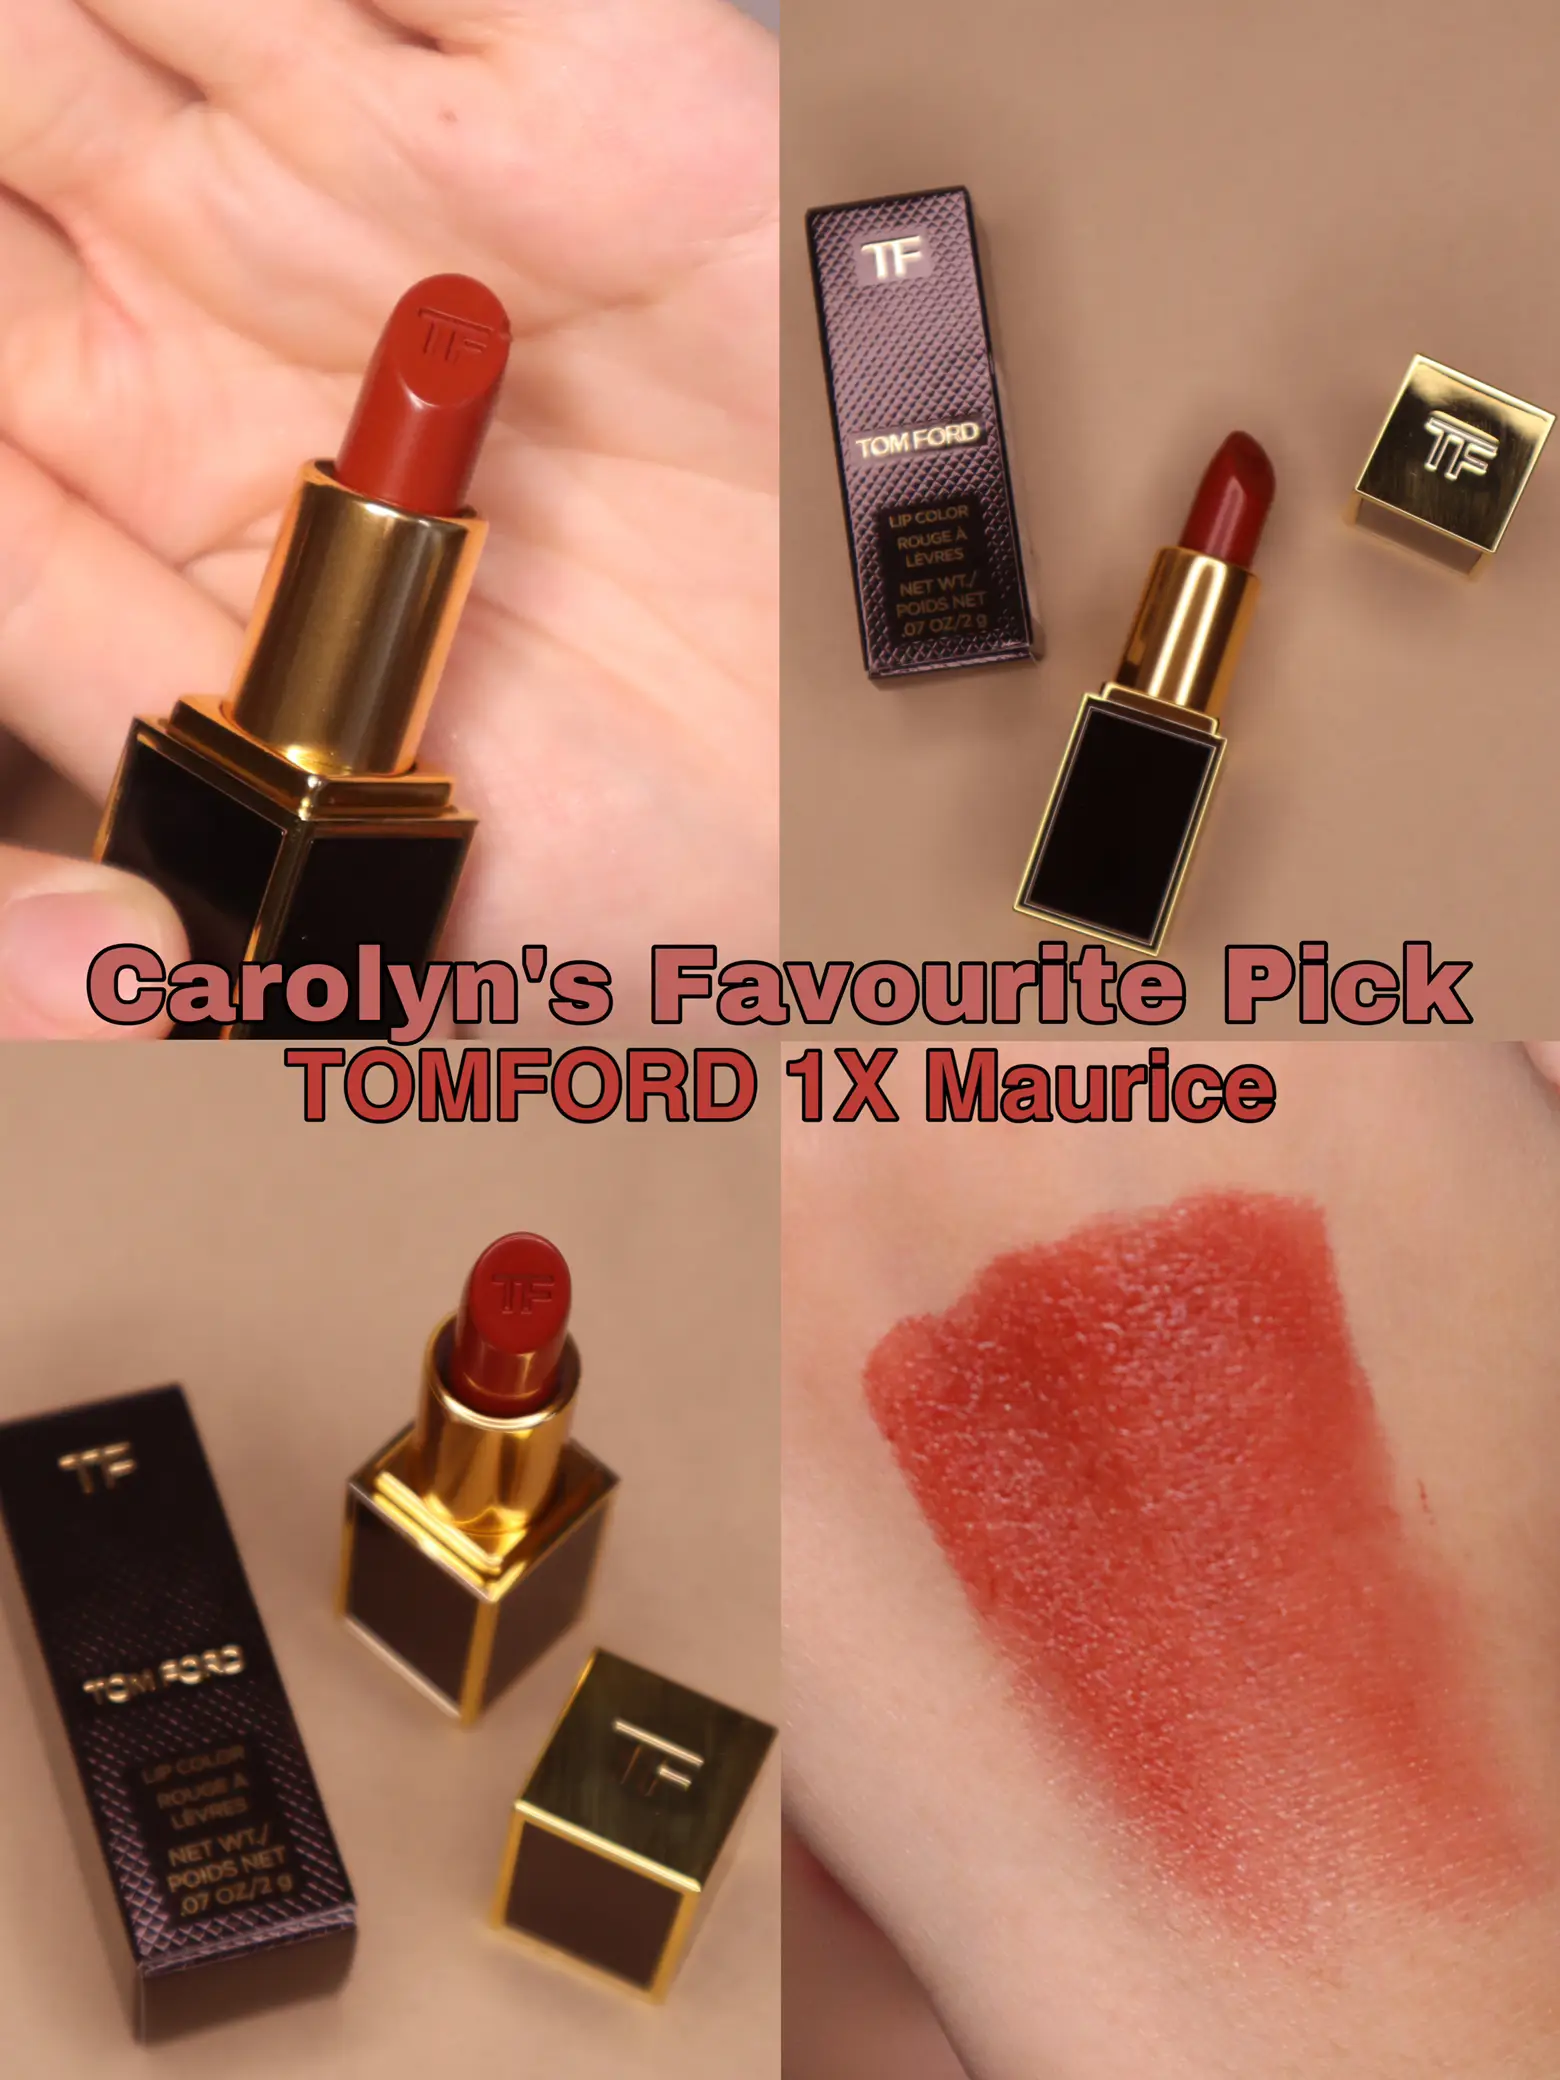 TOMFORD SATIN LIPSTICK - 1X MAURICE | Gallery posted by Carolyn See | Lemon8